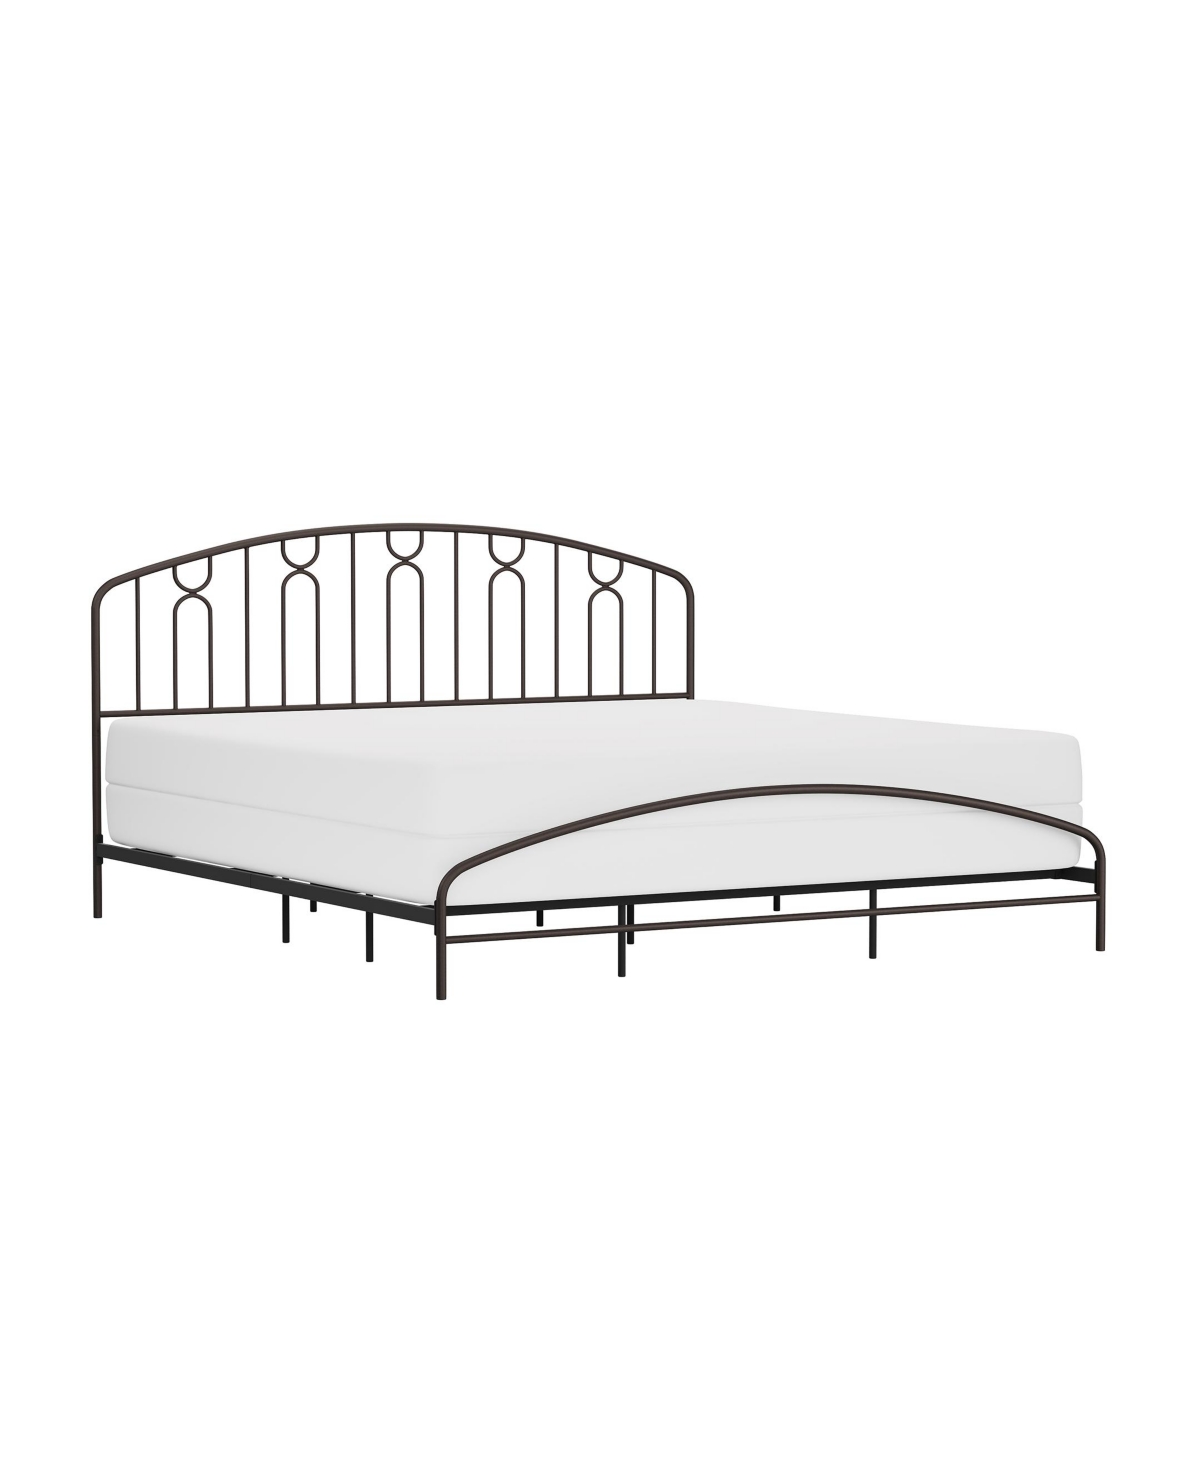 Hillsdale 44" Metal Riverbrooke Furniture Arch Scallop King Bed In Bronze